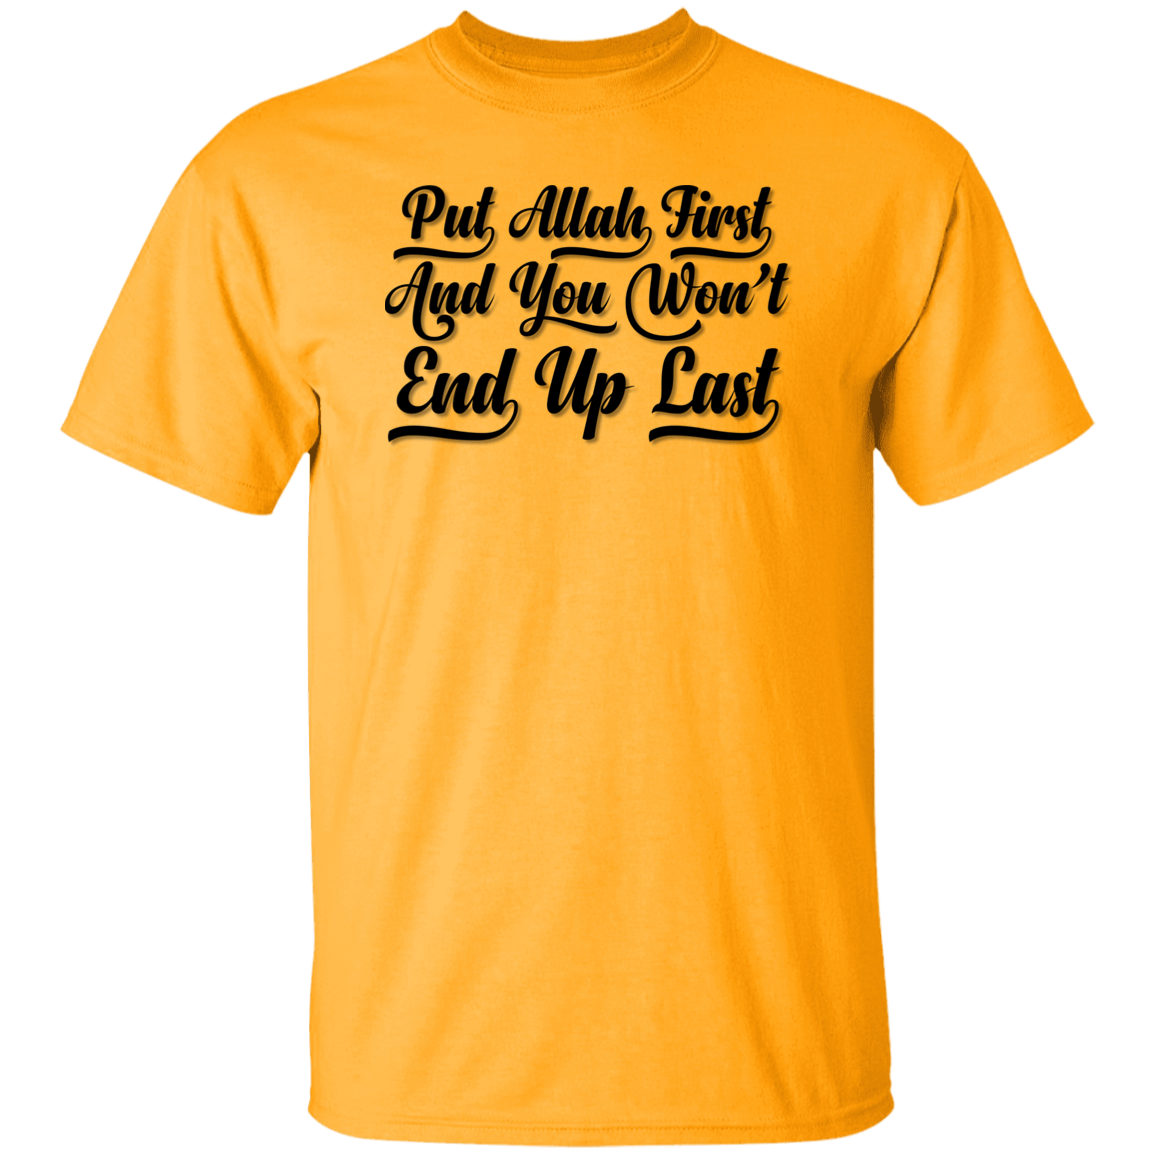 PUT ALLAH FIRST AND YOU WON'T END UP LAST  T-Shirt (MORE COLOR OPTIONS)